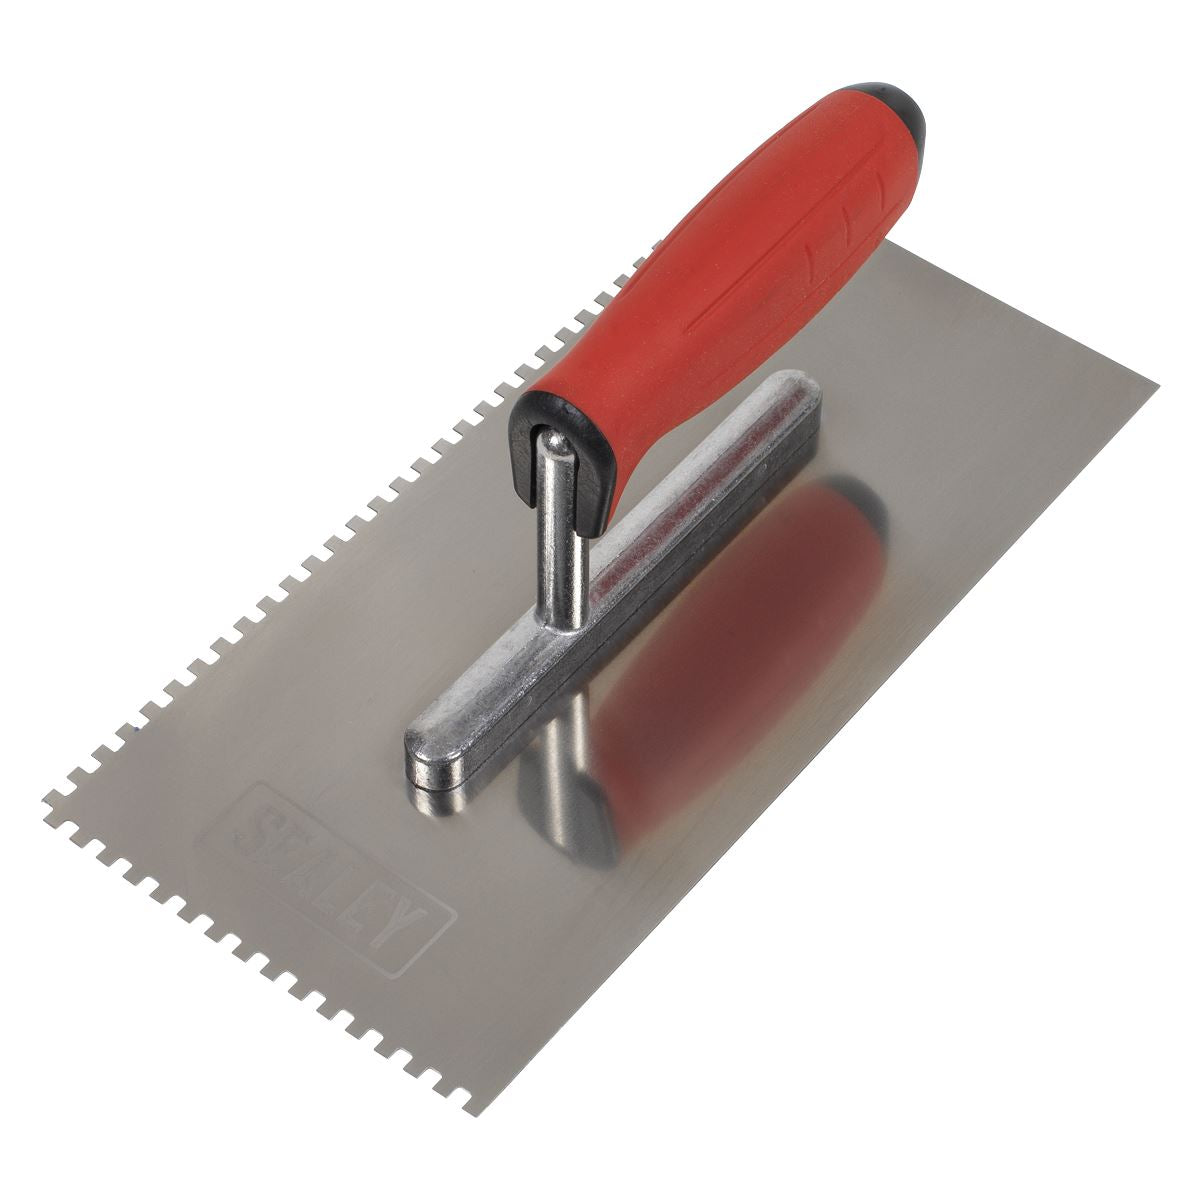 Sealey Stainless Steel 270mm Notched Trowel - Rubber Handle - 4mm